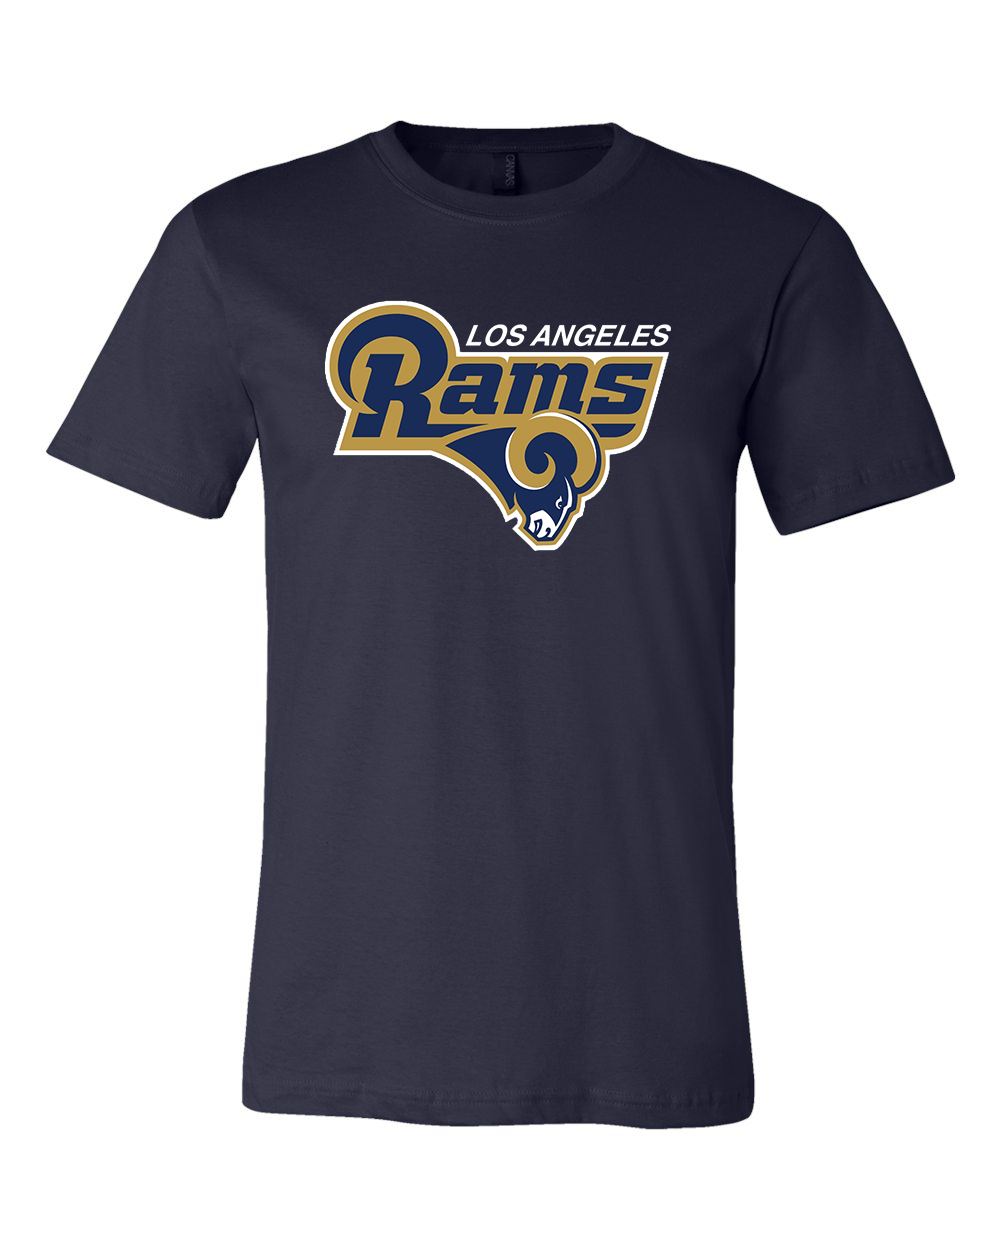 Jared Goff Los Angeles Rams Jersey player shirt